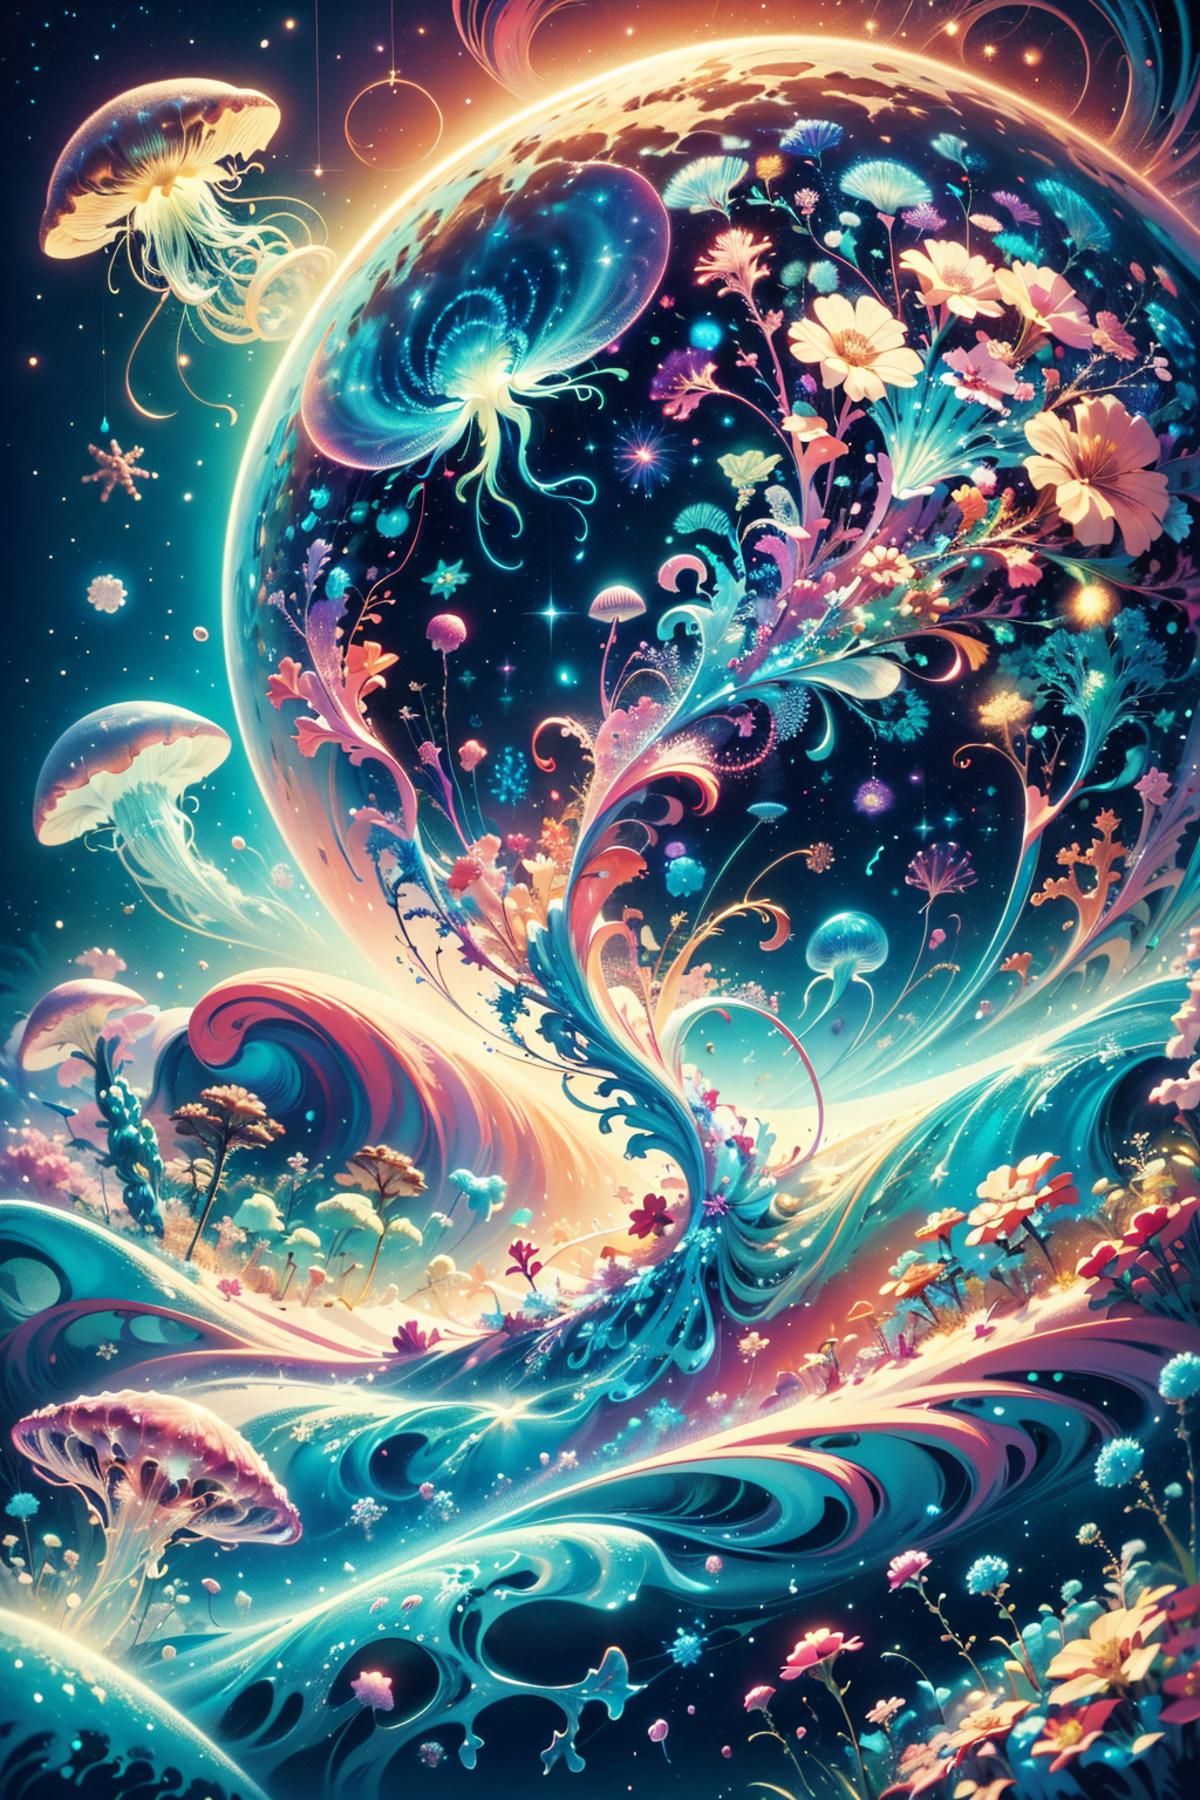 Psychedelic Artwork of a Colorful Universe with Flowers, Mushrooms, and Stars